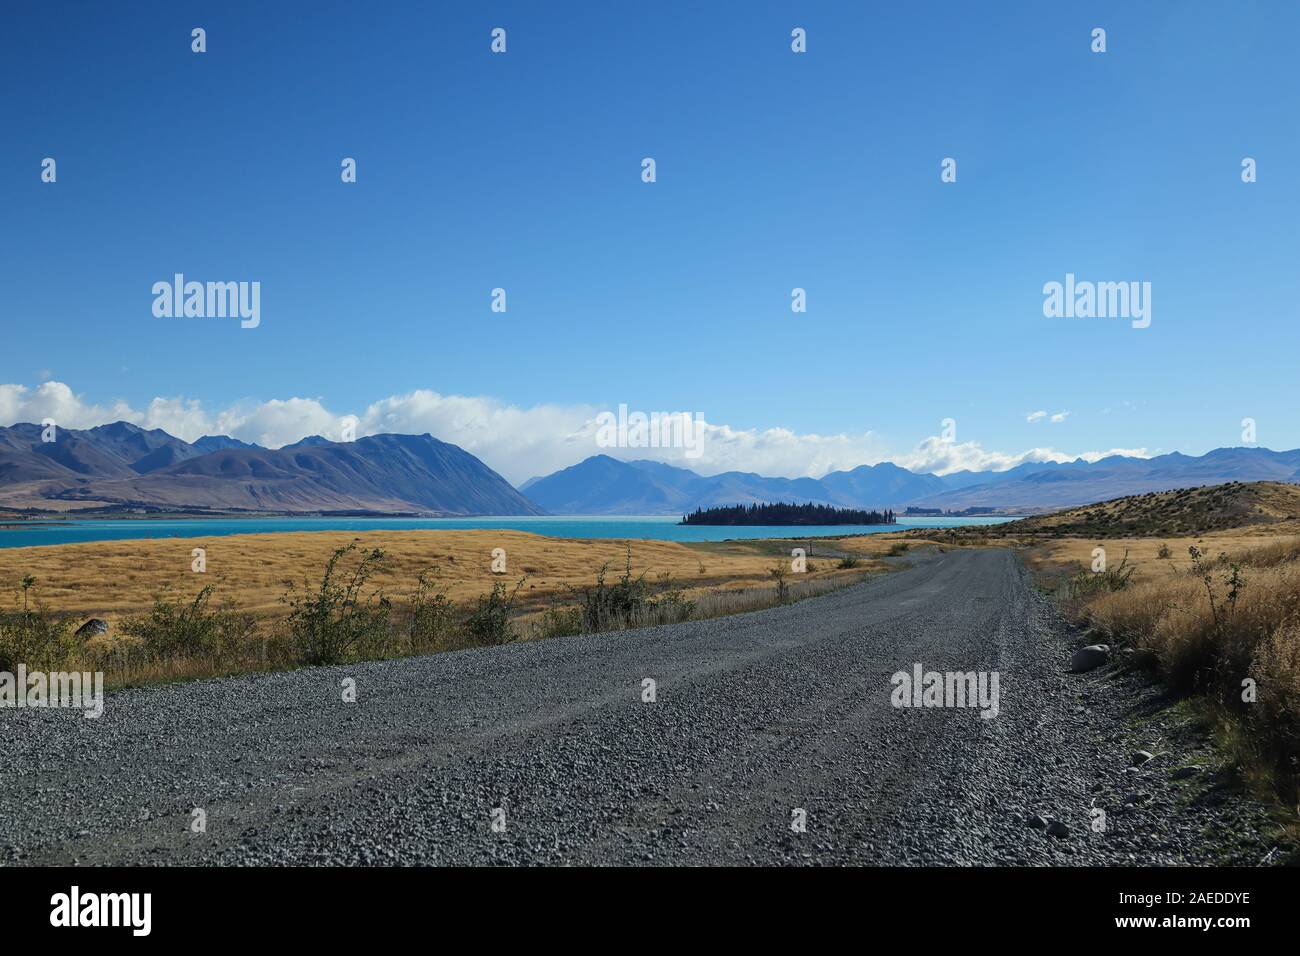 Empty road with a blue lake and mountains in the background Stock Photo